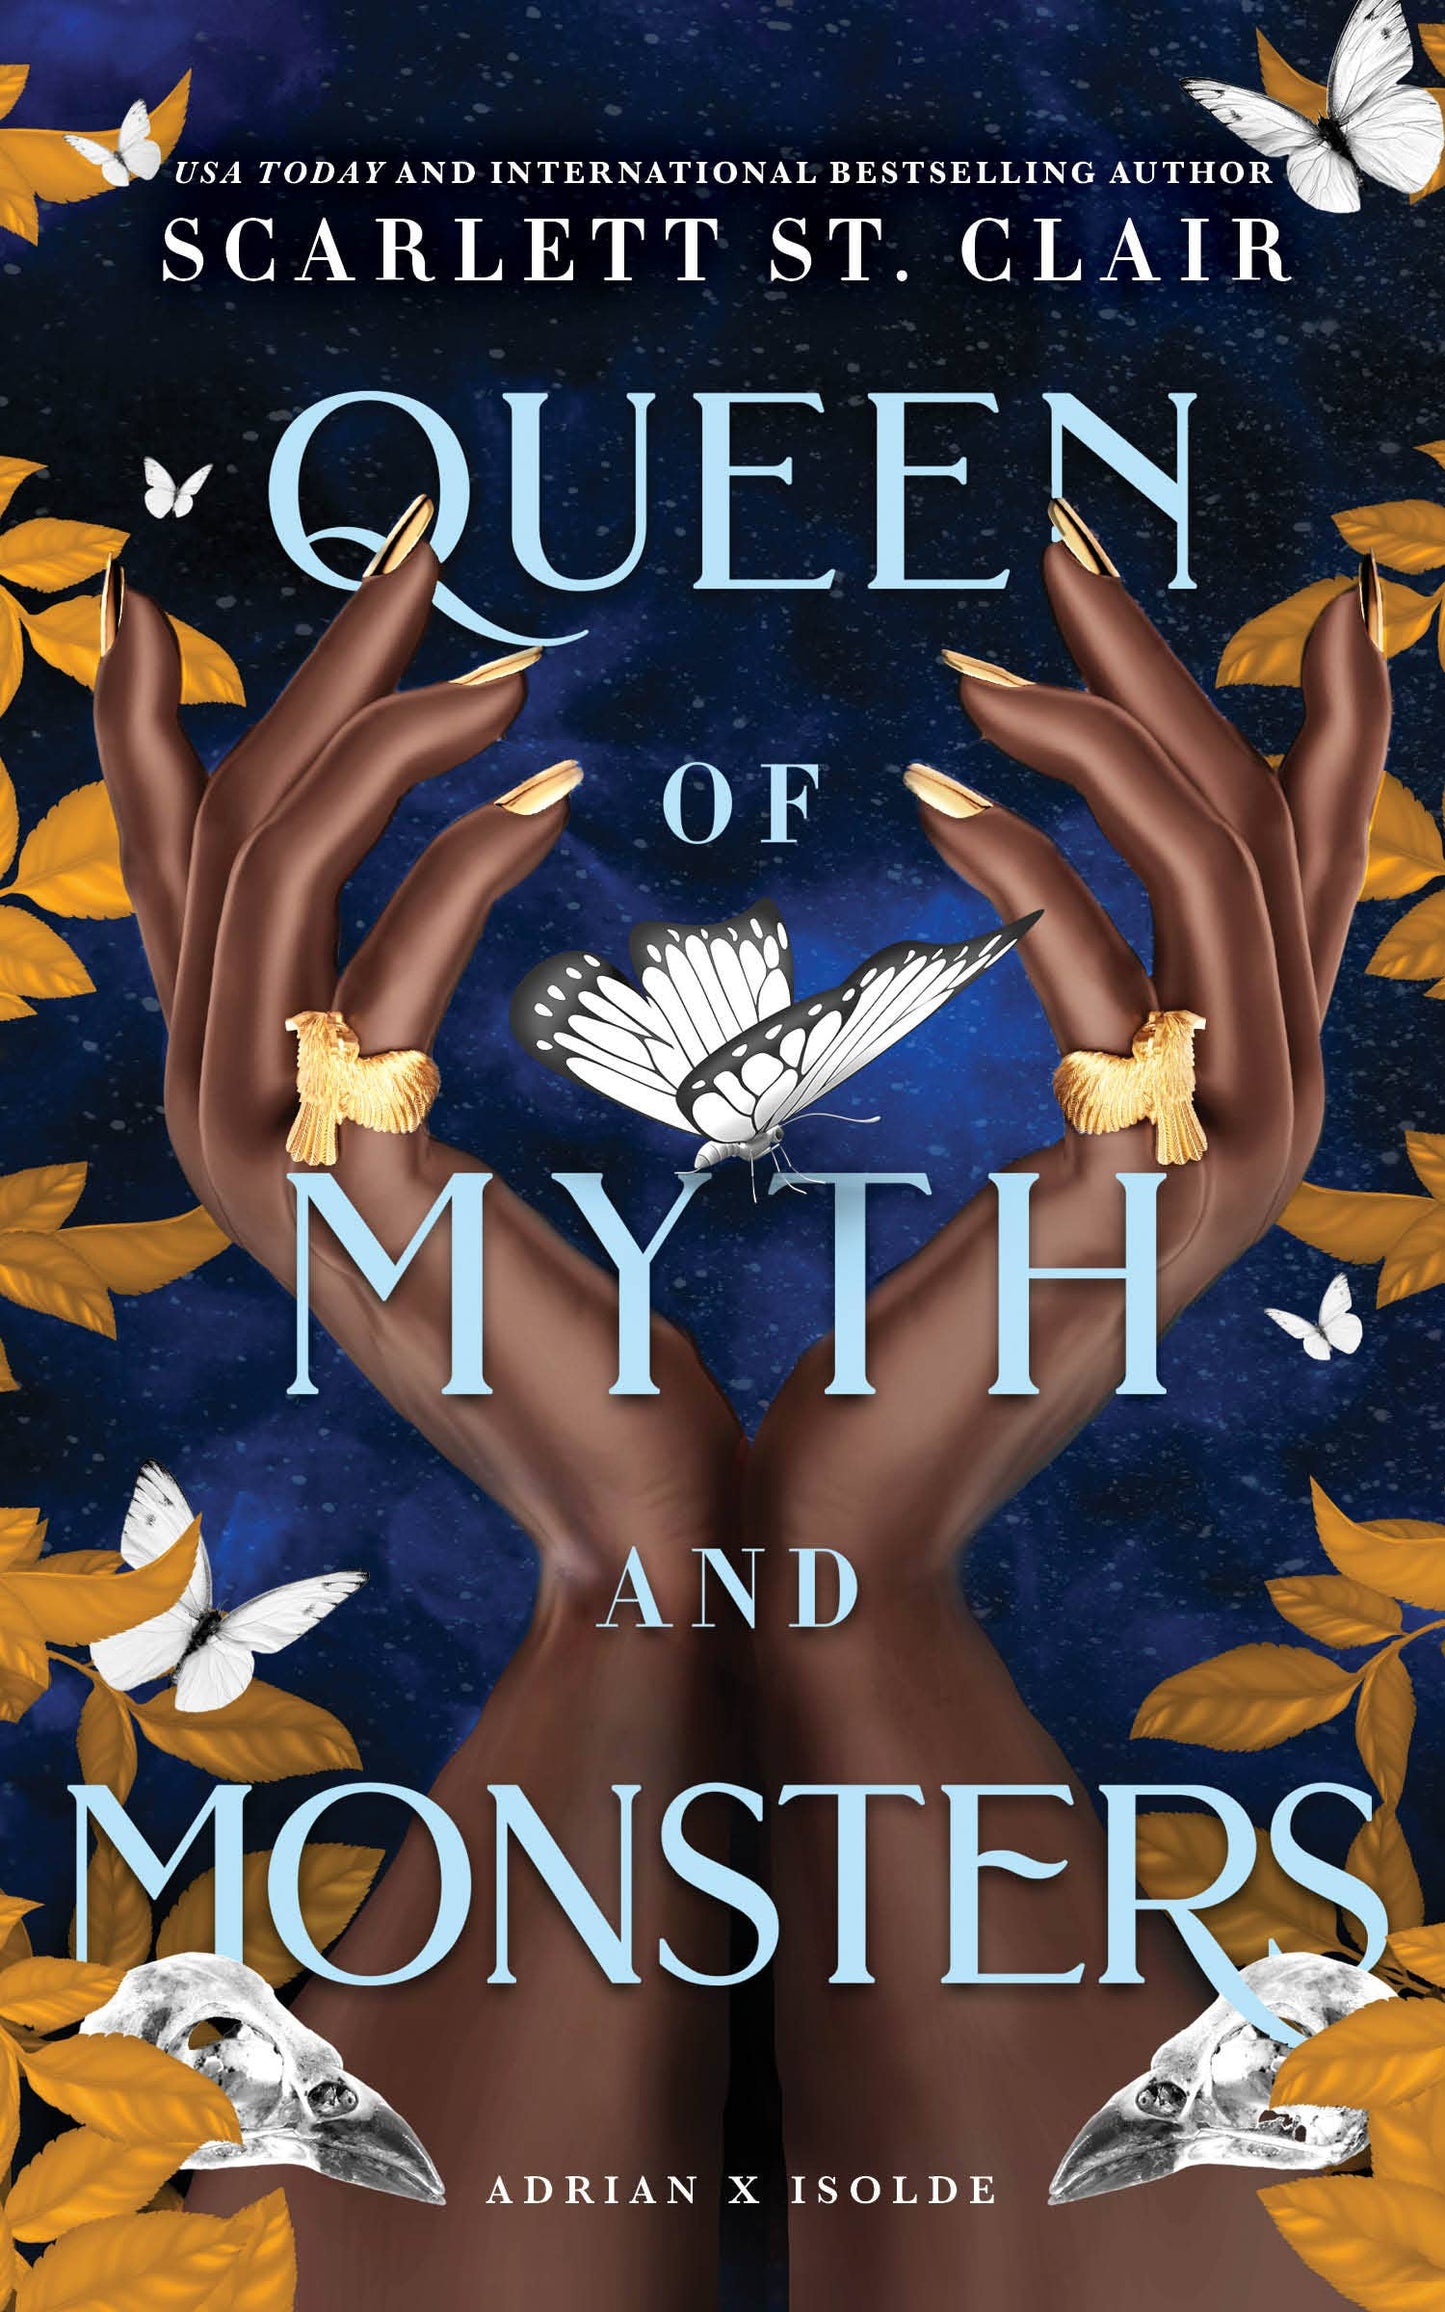 Queen of Myth and Monsters by Scarlett St. Clair (Adrian X Isolde #2) (Paperback)